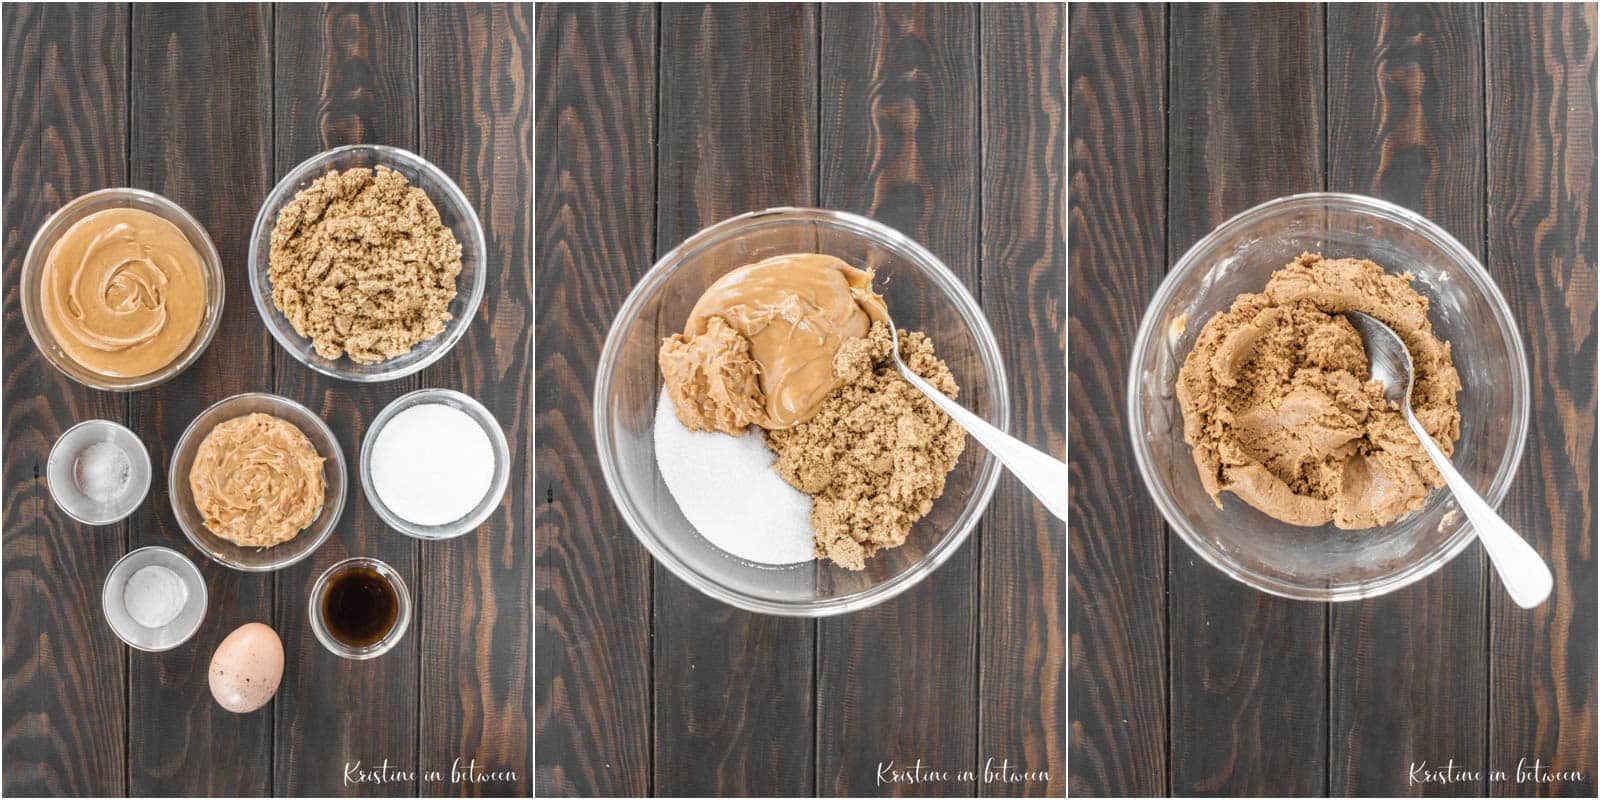 Step-by-step photos of how to make flourless peanut butter cookies.